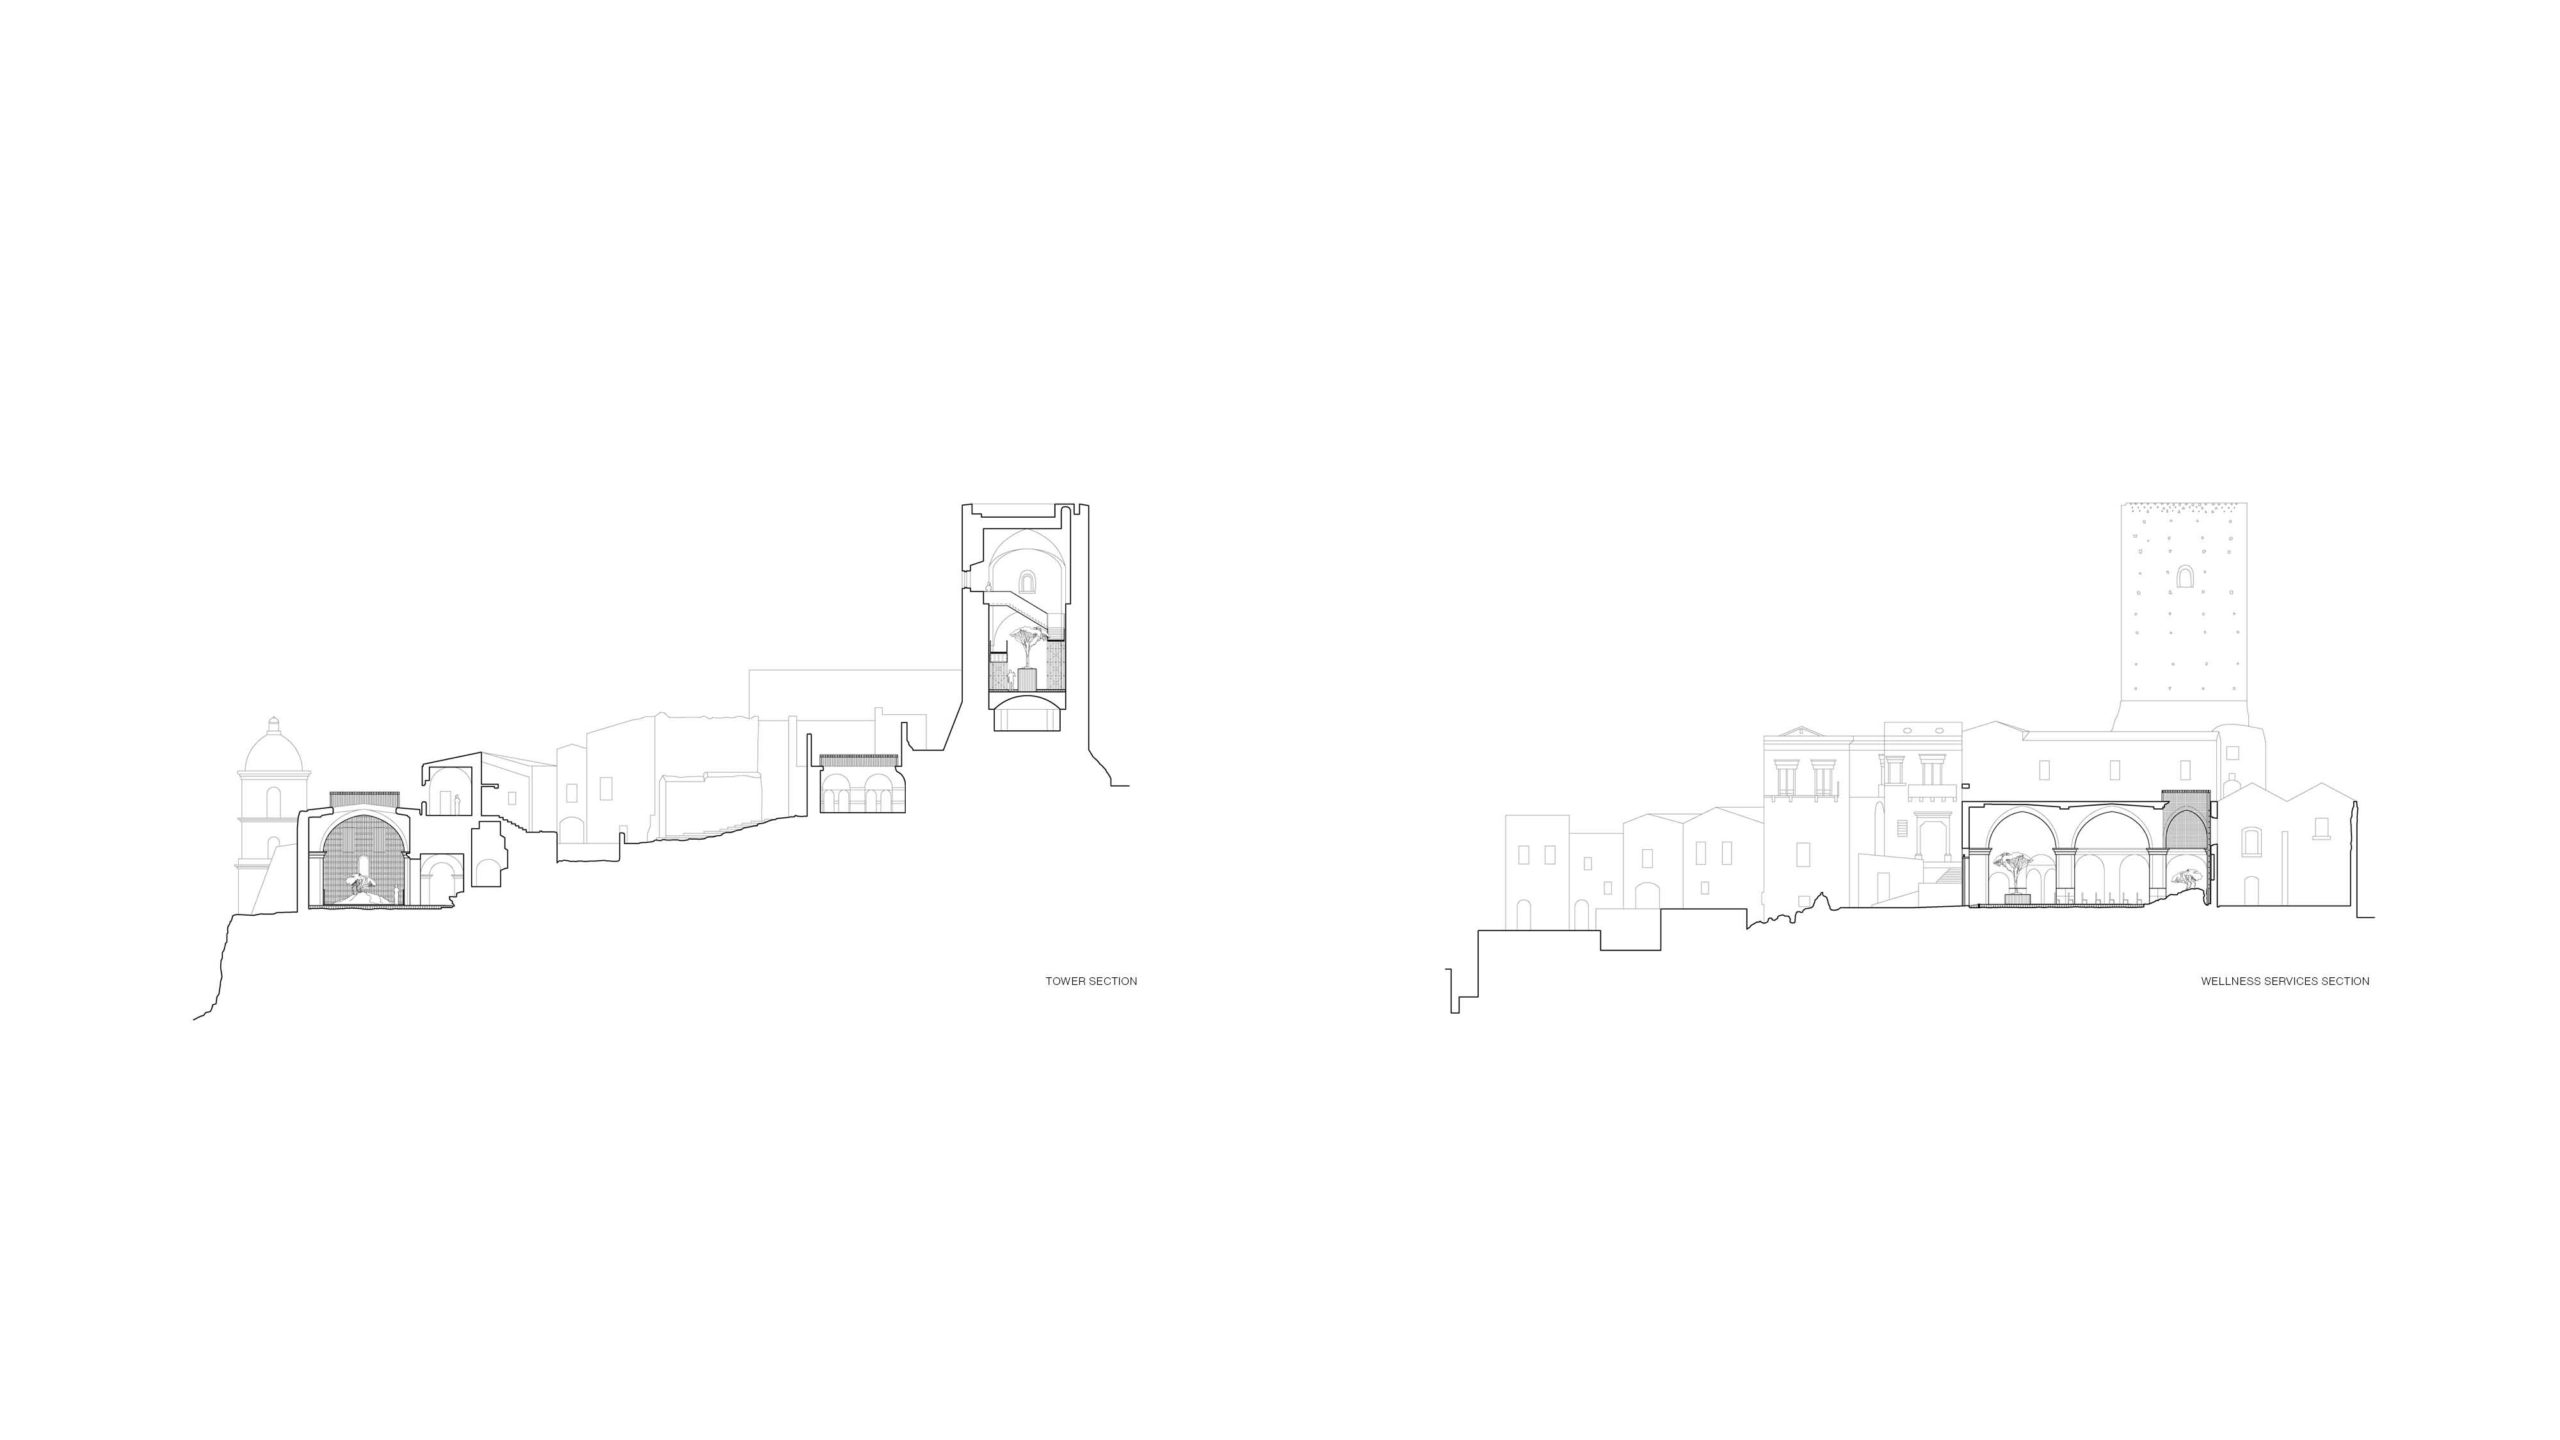 Unbuilt : TRACES - GHOST TOWN REFUGE, at Craco, Italy, by Claudio C. Araya, Yahya Abdullah 11